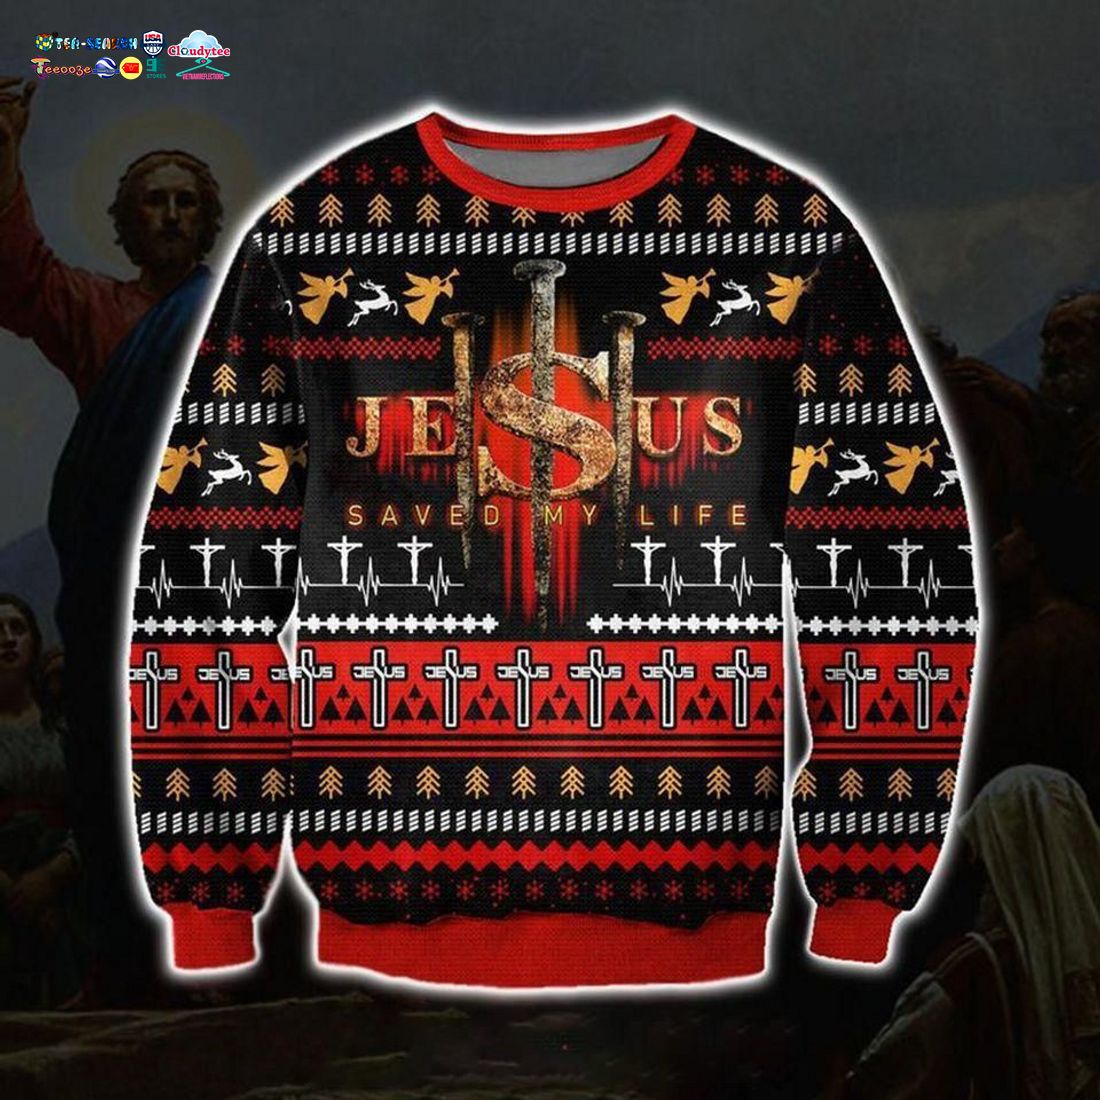 Jesus Saved My Life Ugly Christmas Sweater - You tried editing this time?